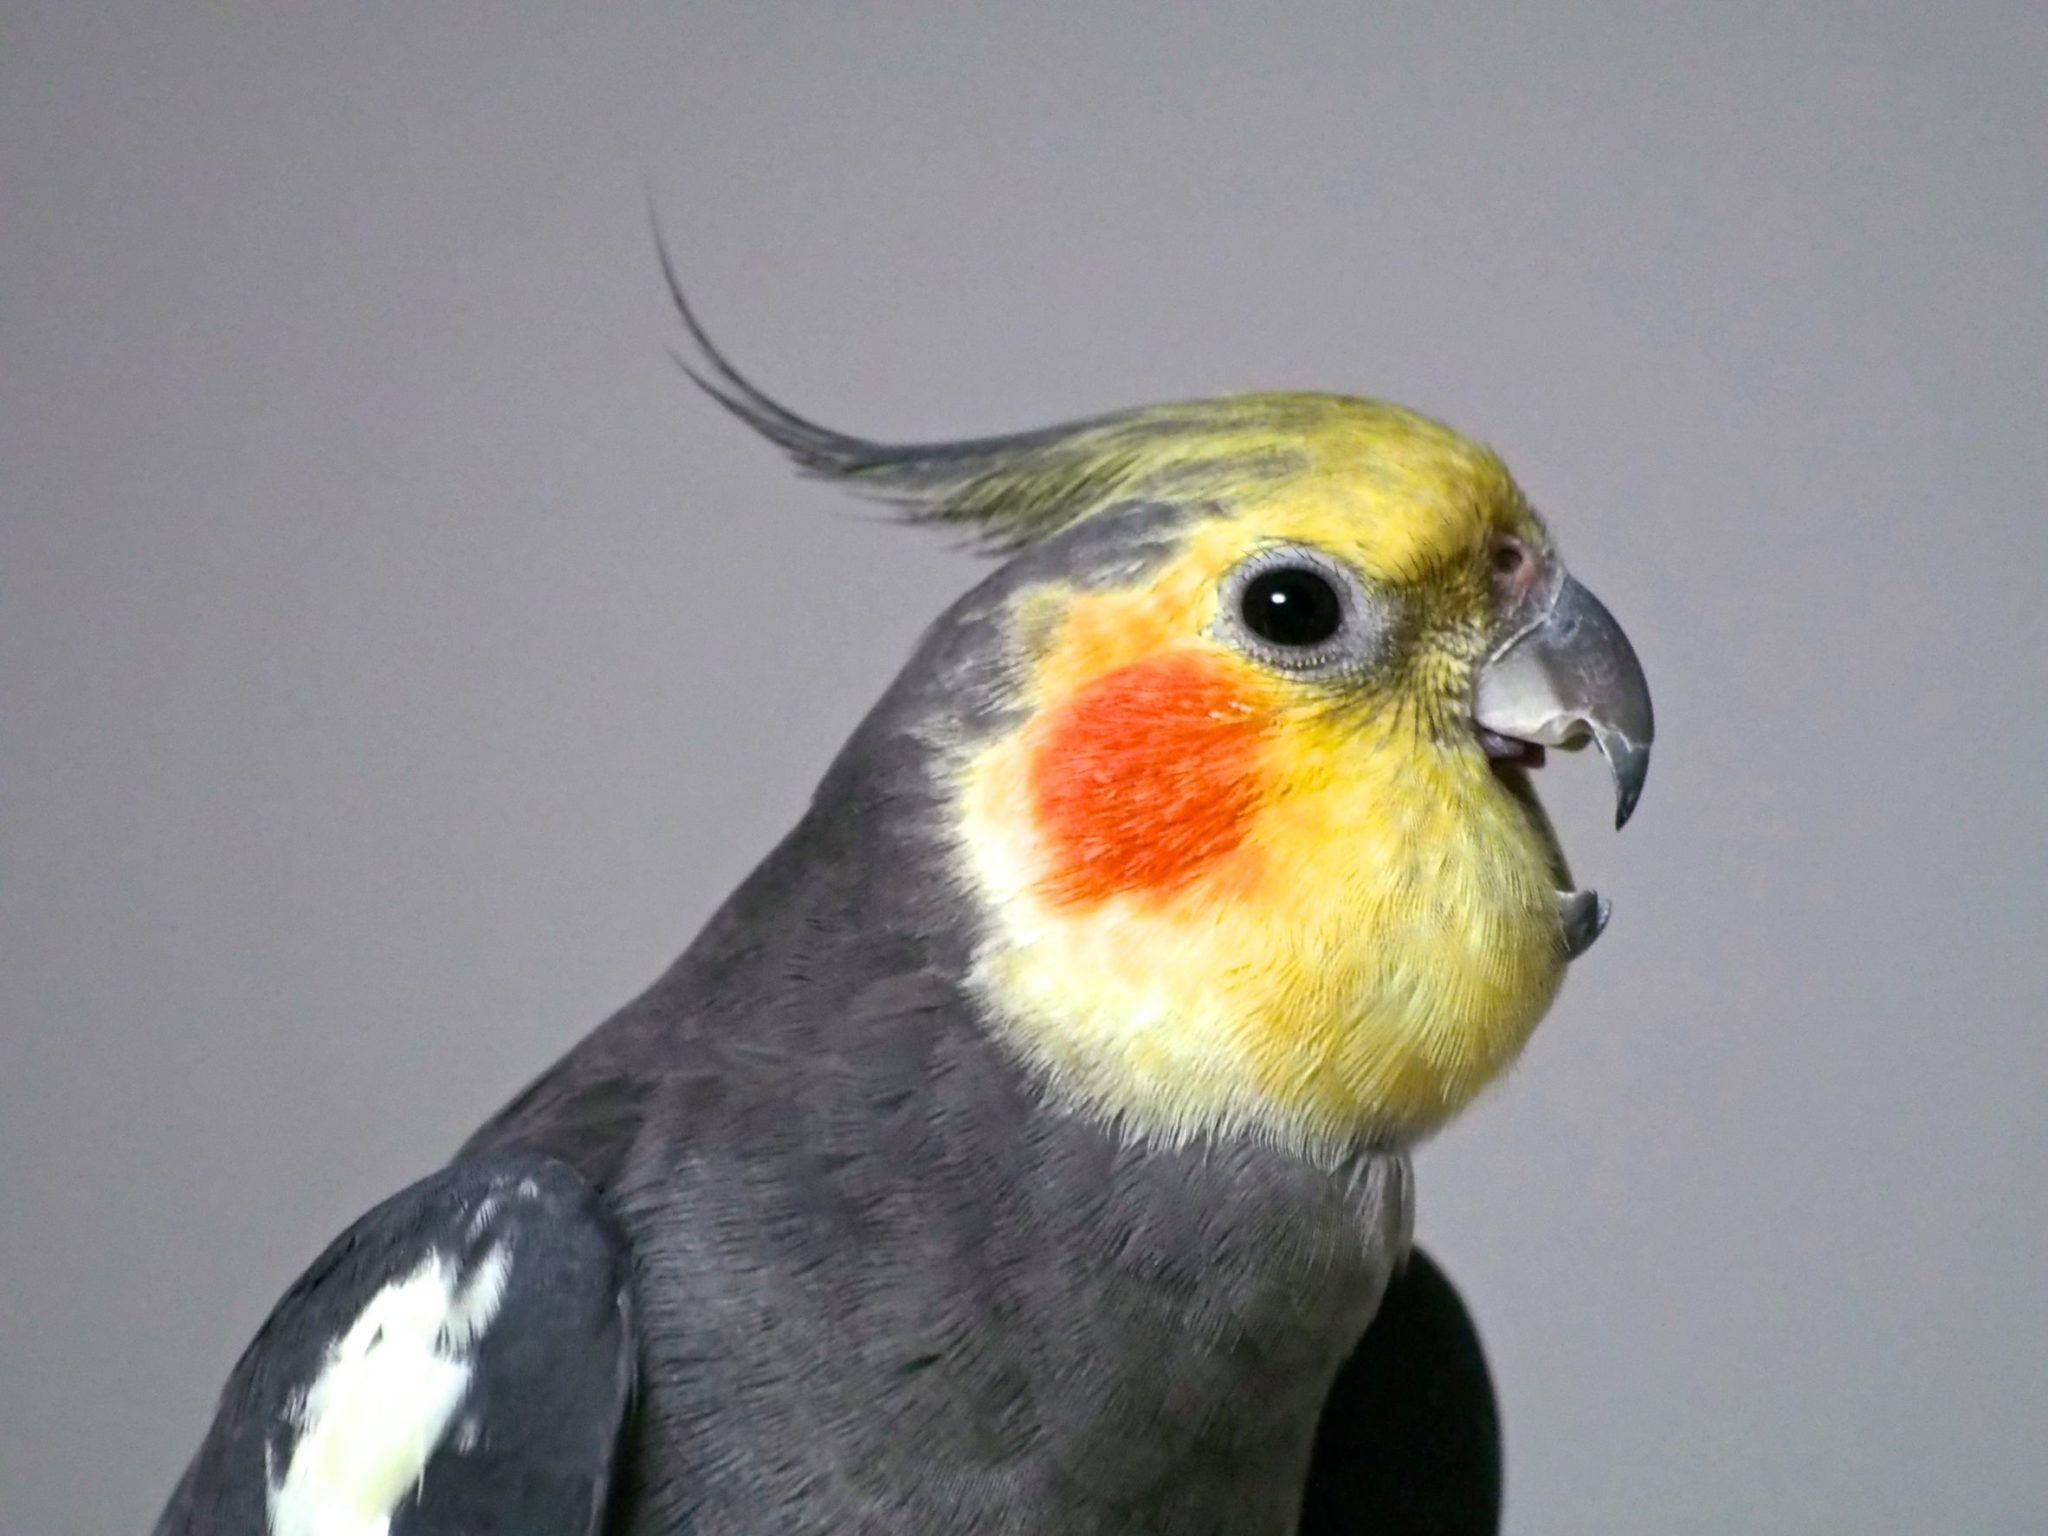 Gray and yellow cockatiell with open beak on gray background